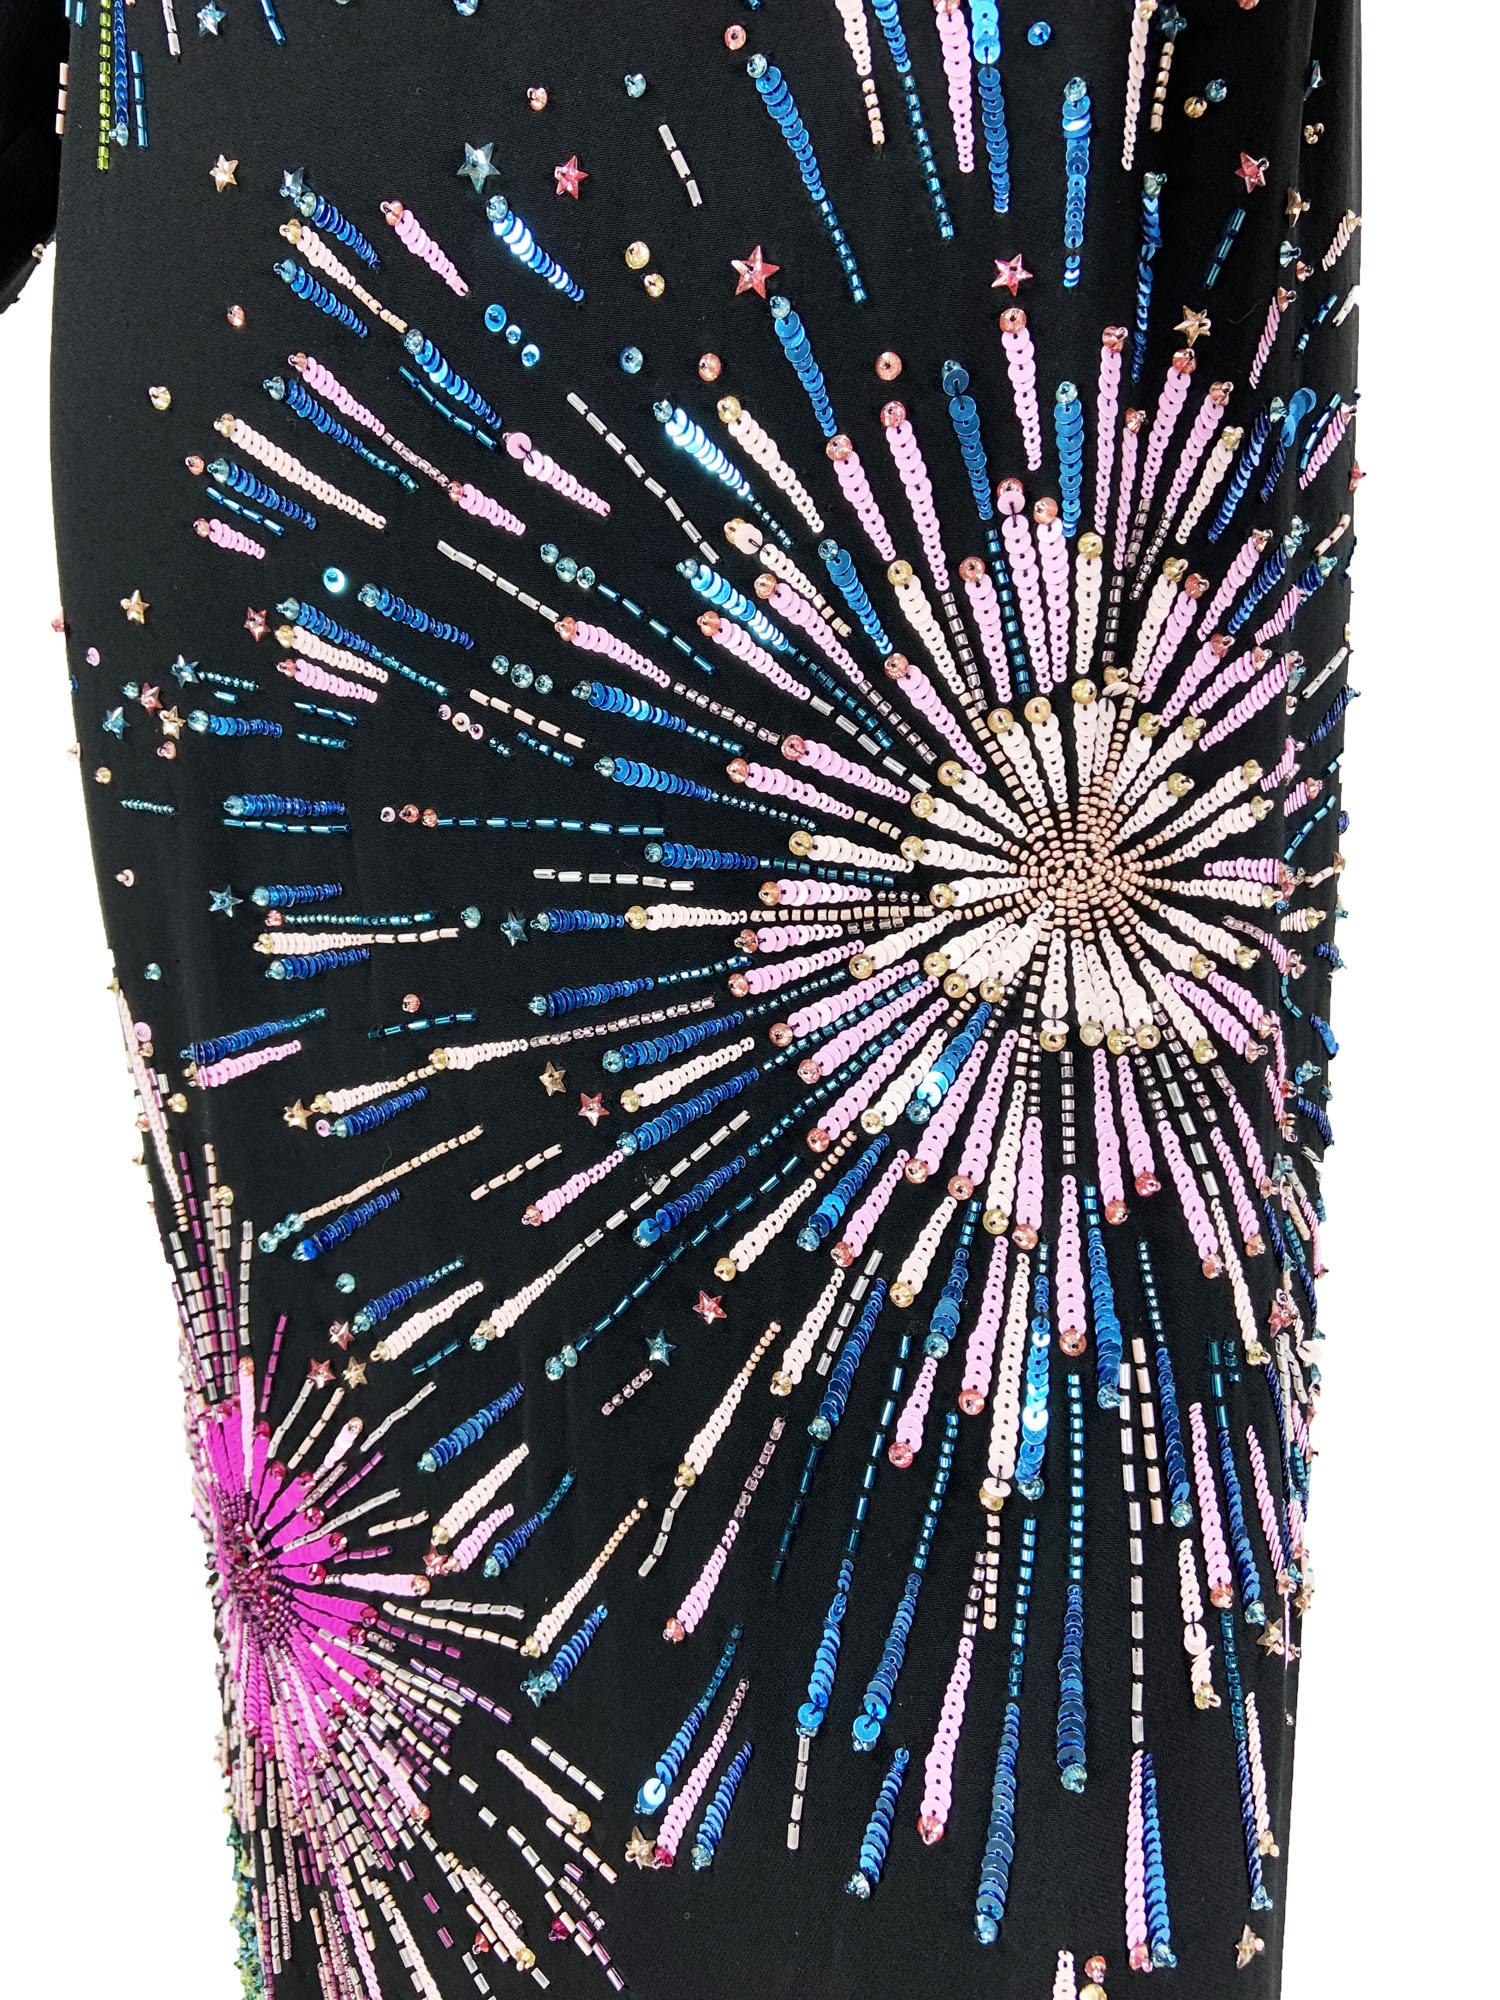 Roberto Cavalli *Firework* Fully Embellished Black Dress Gown It 46 - US 10/12 For Sale 5